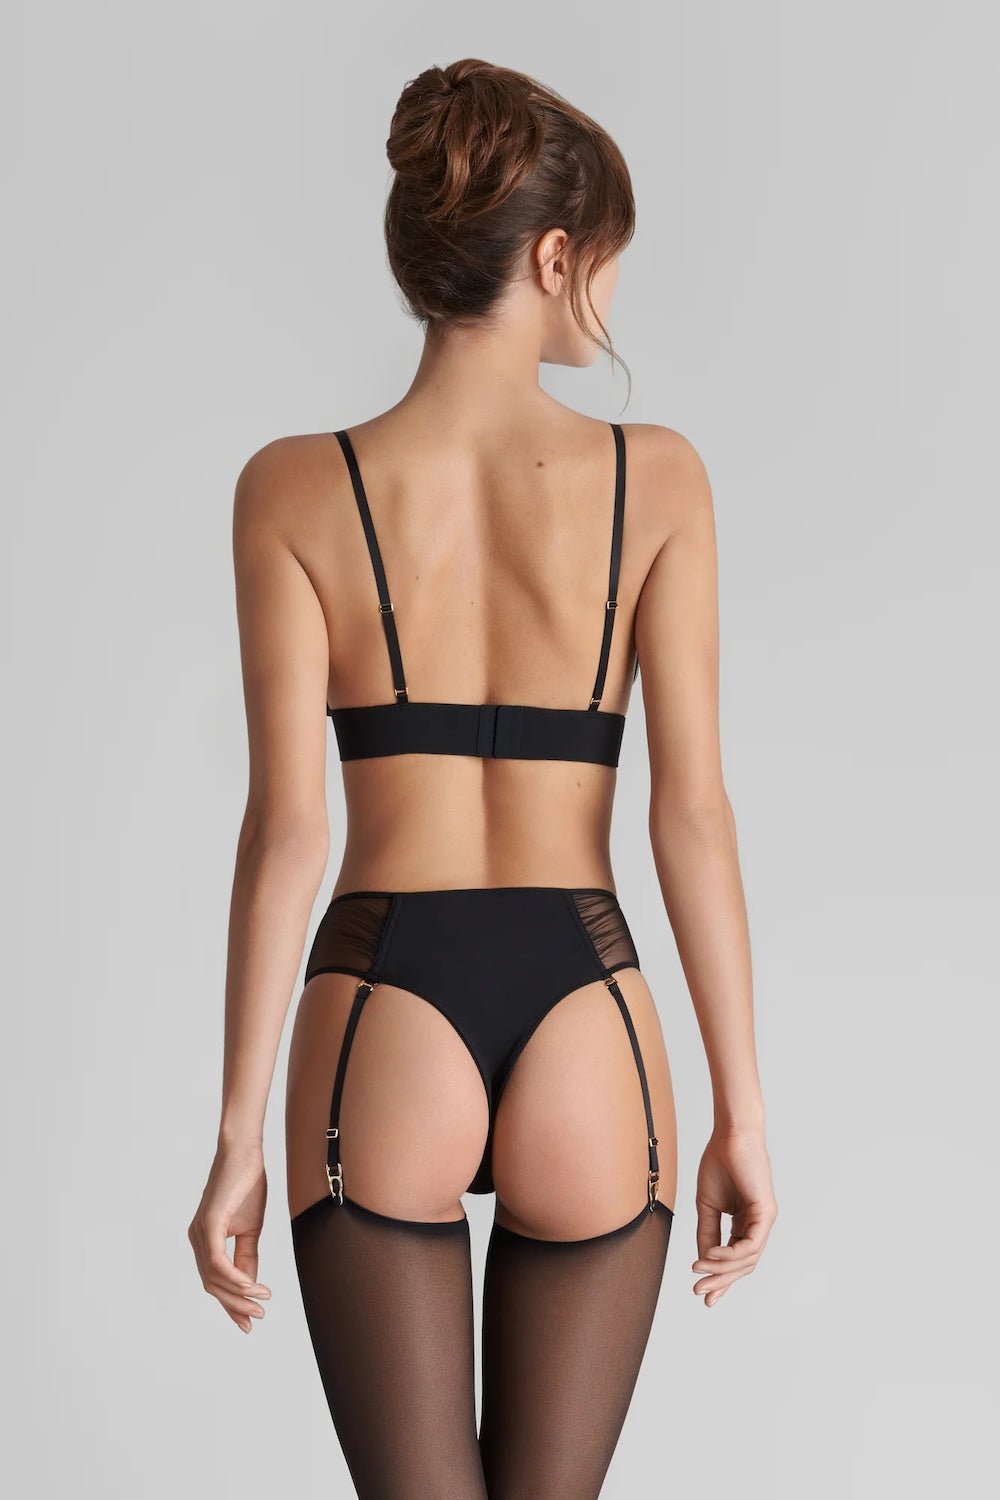 Maison Close Nuit Fauve Openable High Waist Tanga With Suspenders - Sugar Cookies Lingerie